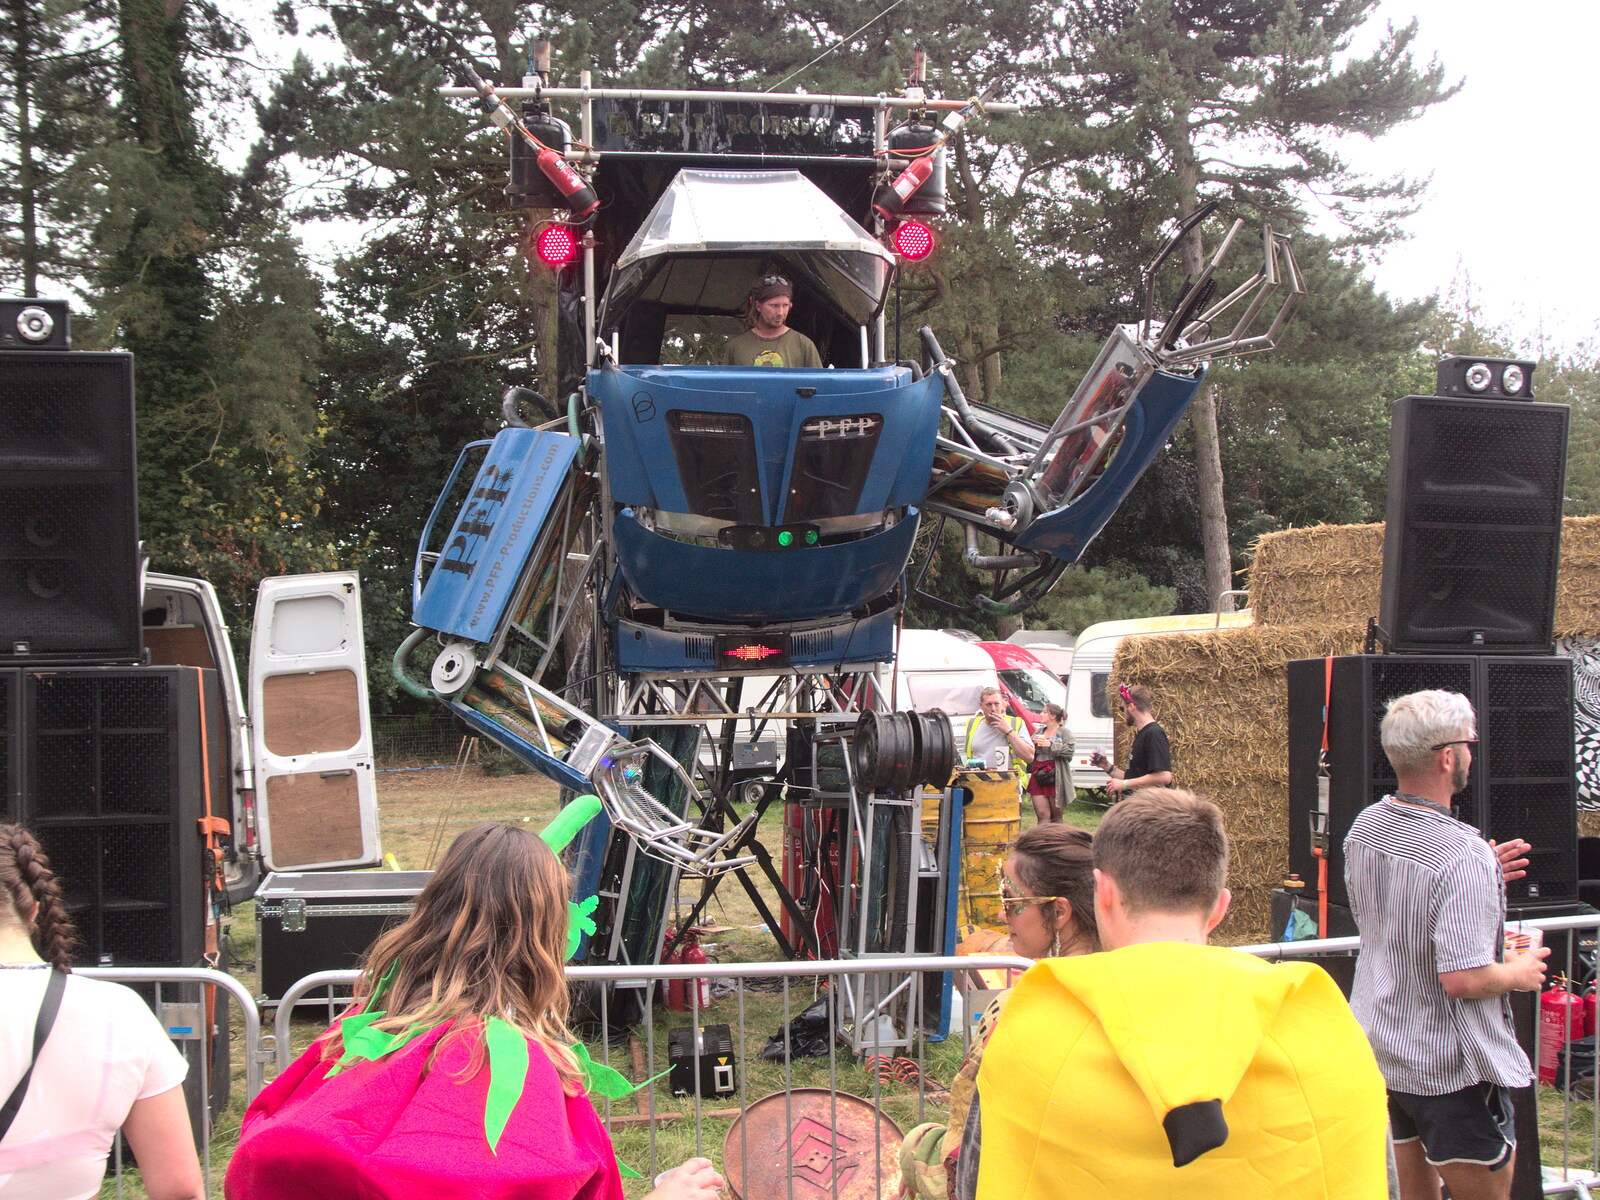 The Outer Limits DJ booth is a transformer from Maui Waui Festival, Hill Farm, Gressenhall, Norfolk - 28th August 2021